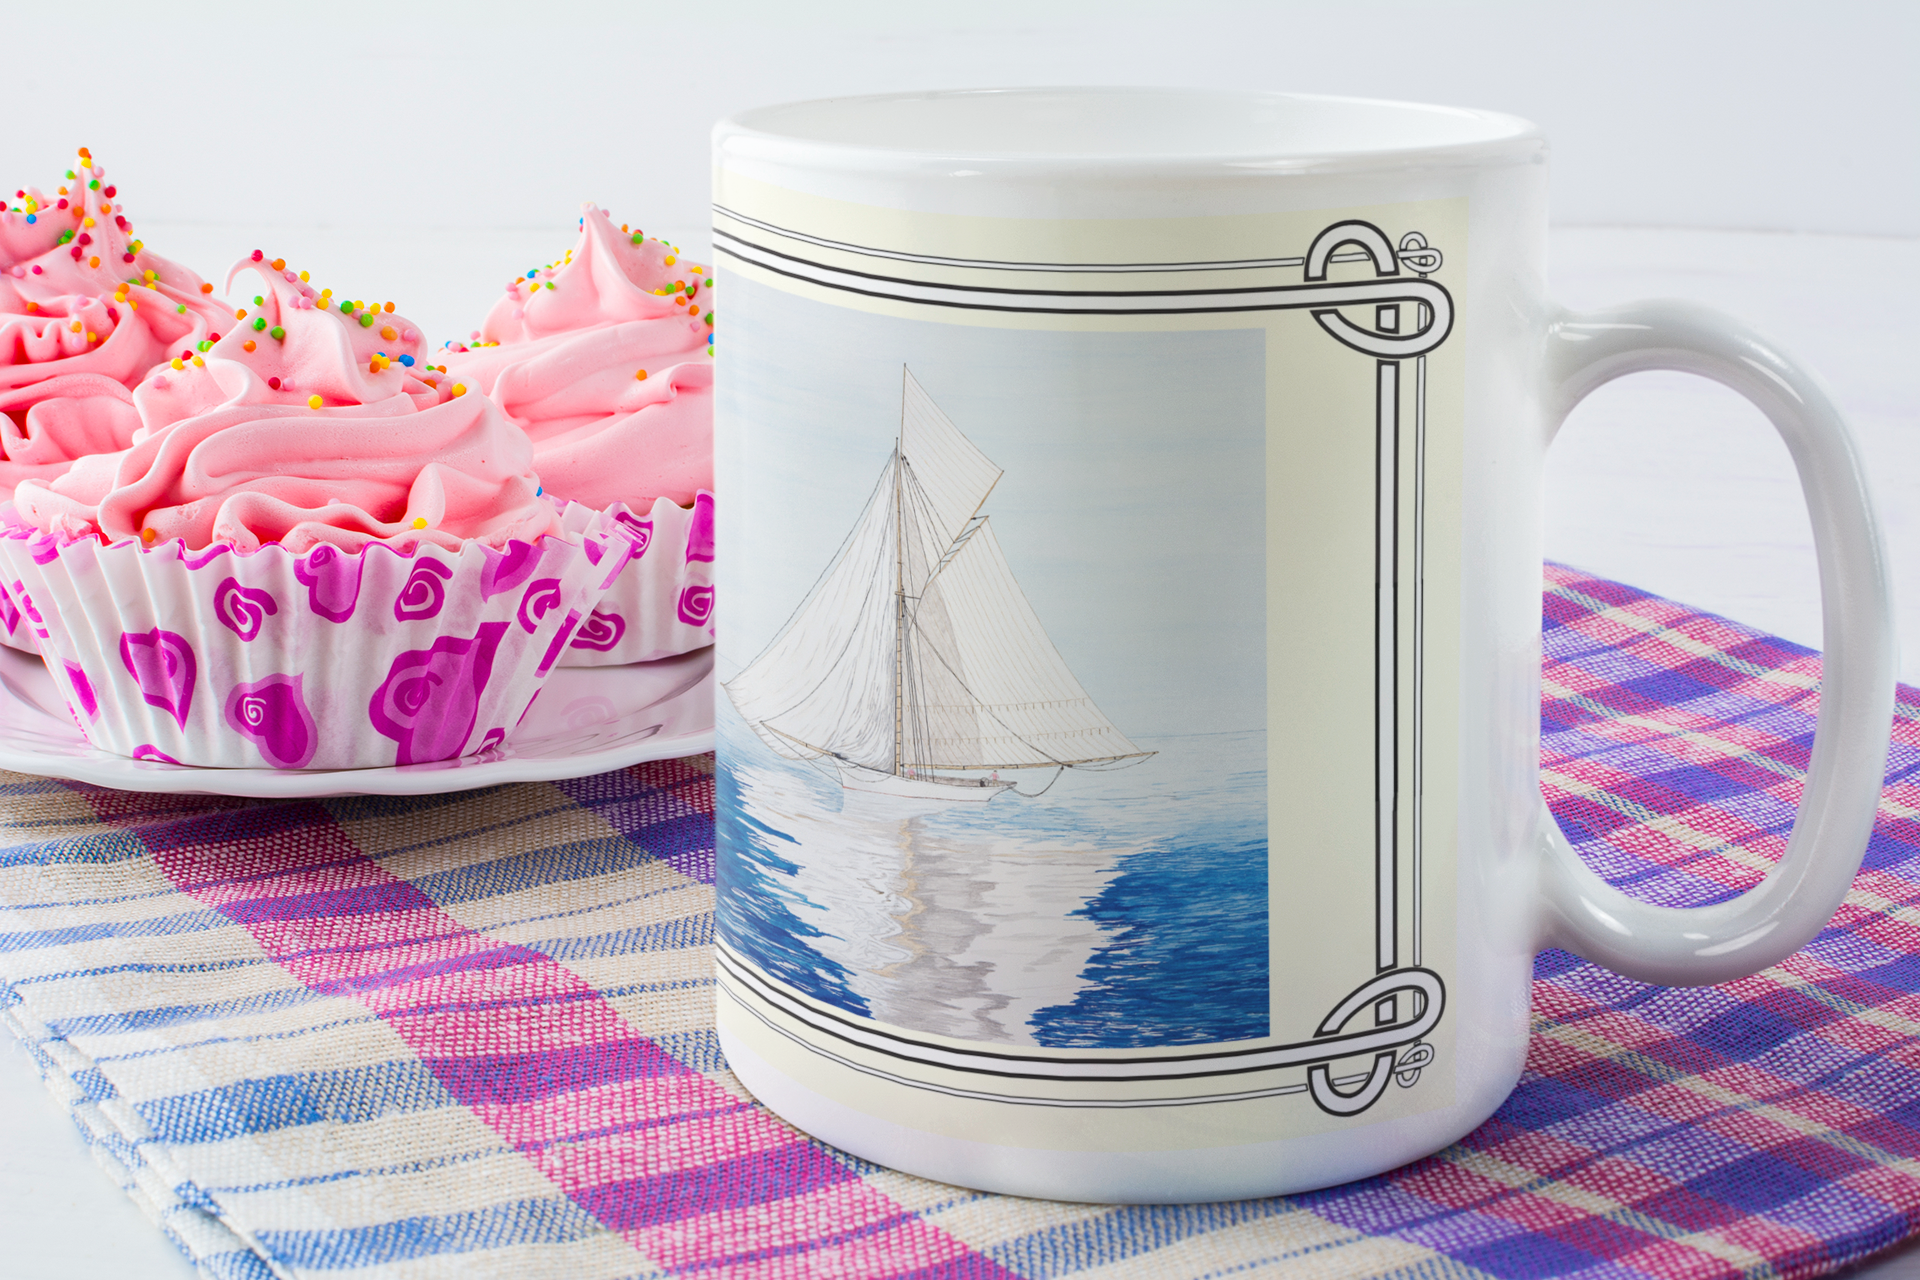 A cutter is becalmed on the run as the racer waits for a breeze on the dlownward leg of the race. The Becalmed 11 ounce mug is a reproduction of a watercolor painting by Lee M. Buchanan.